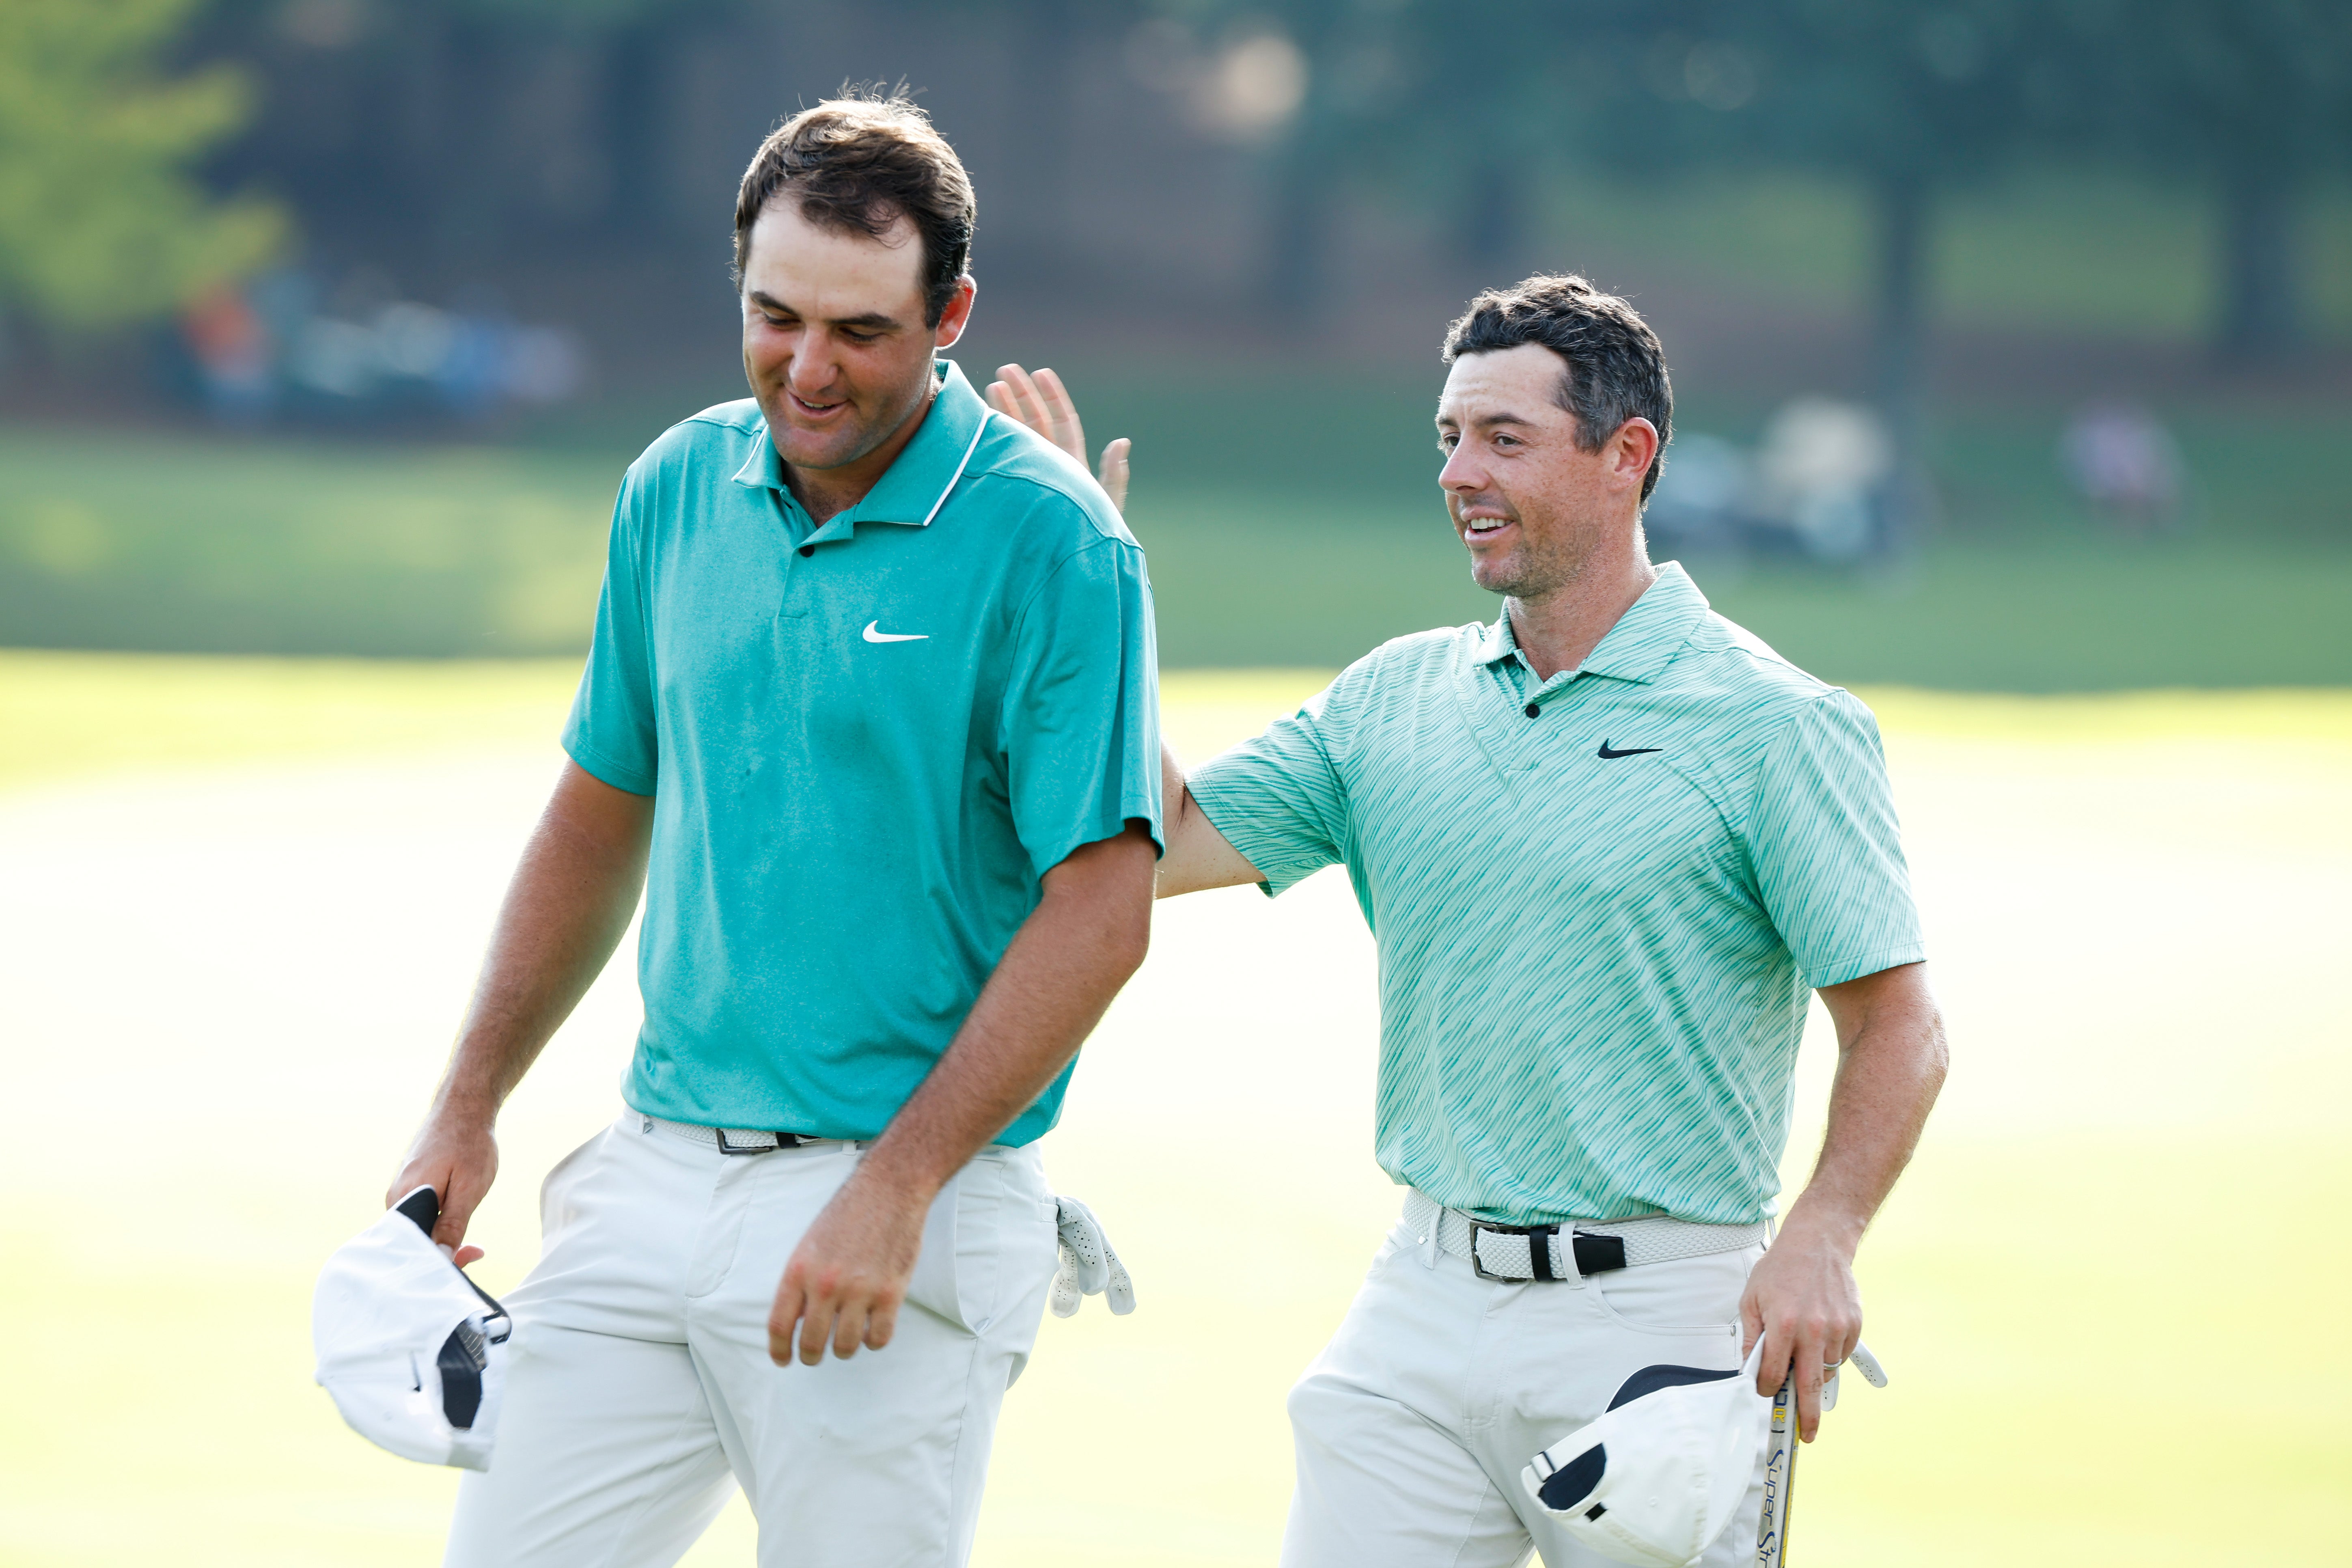 Scottie Scheffler (left) and Rory McIlroy are among the contenders for the PGA Championship